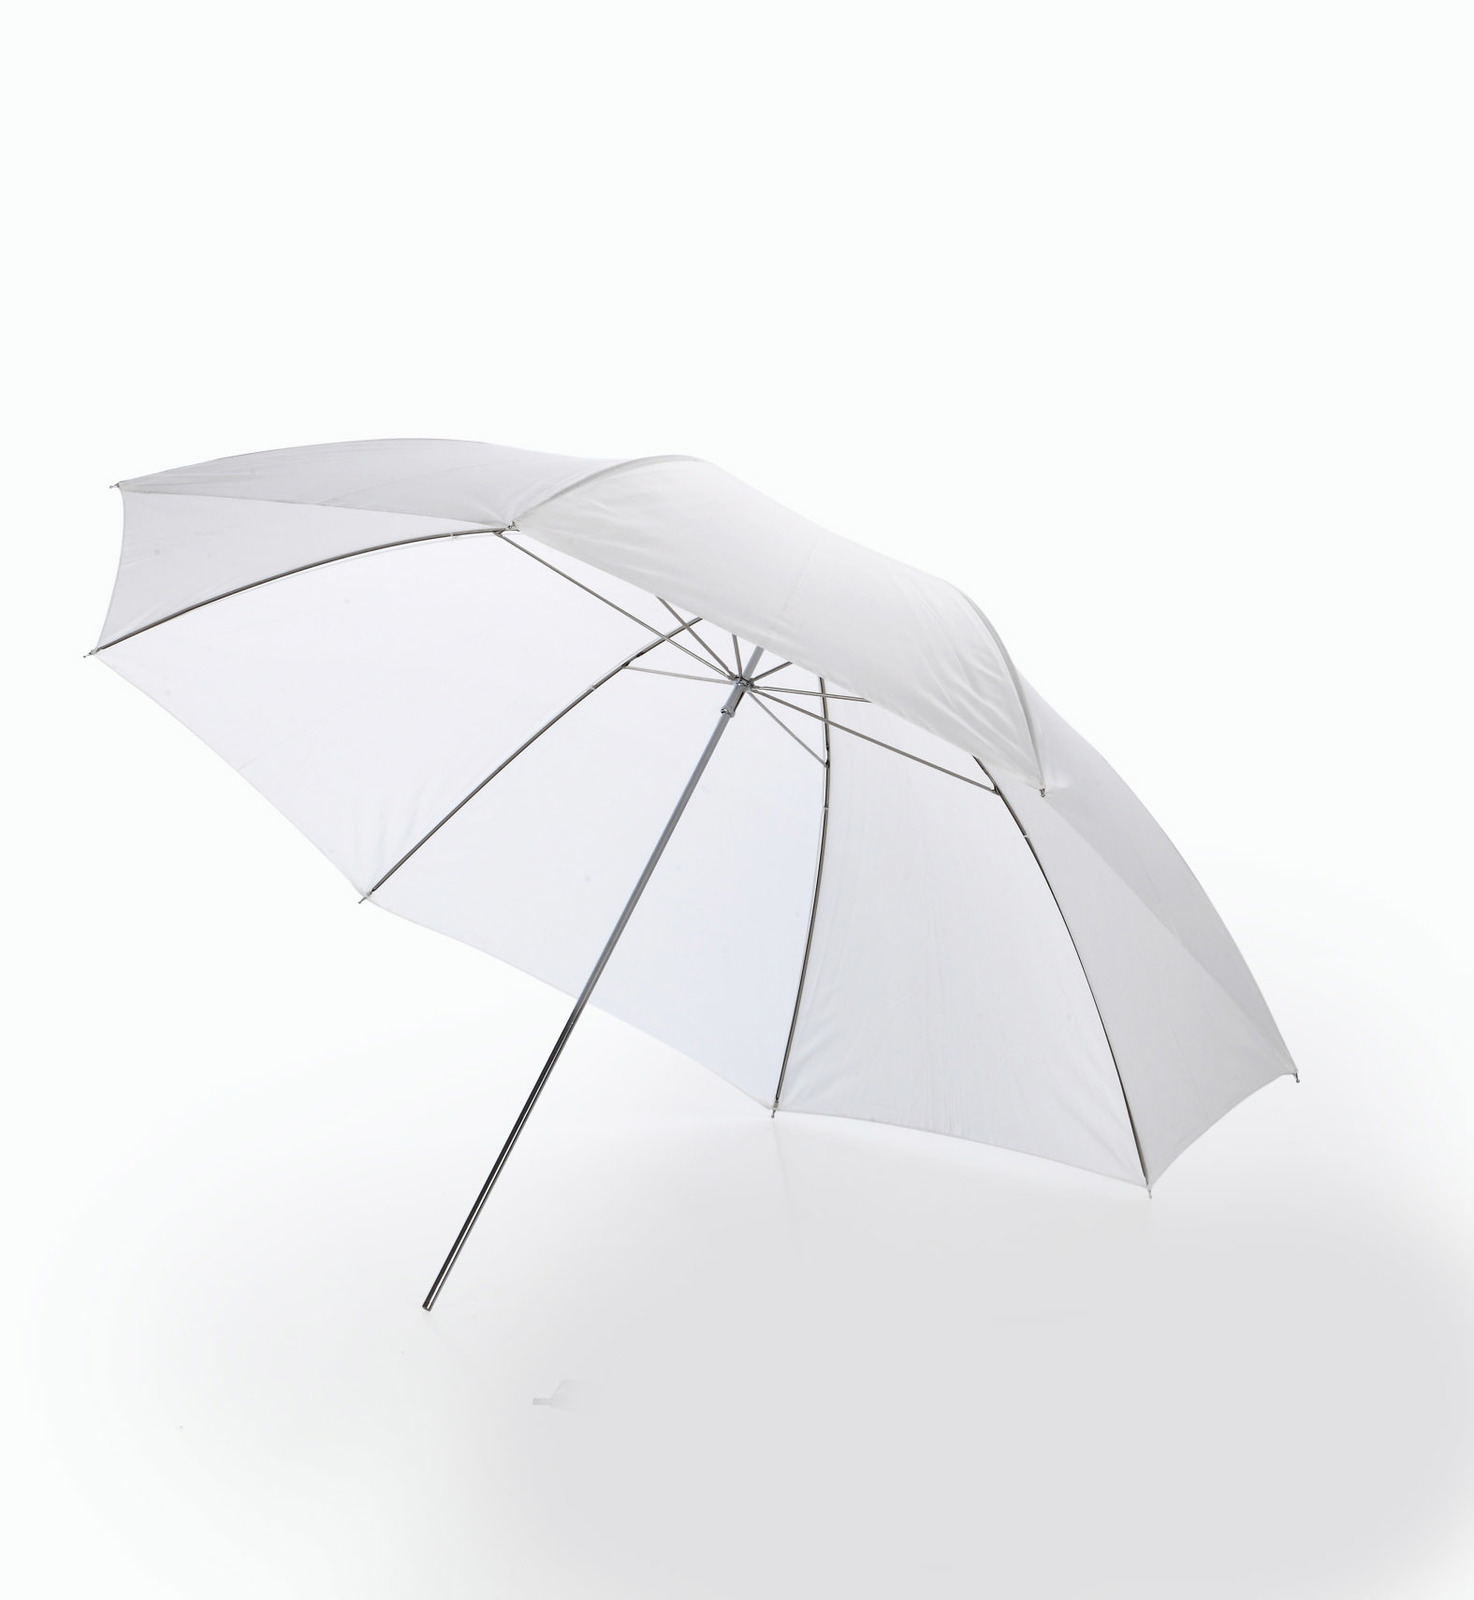 CowboyStudio 40-Inch Black and White Umbrella for Photography and Video Lighting Reflective 